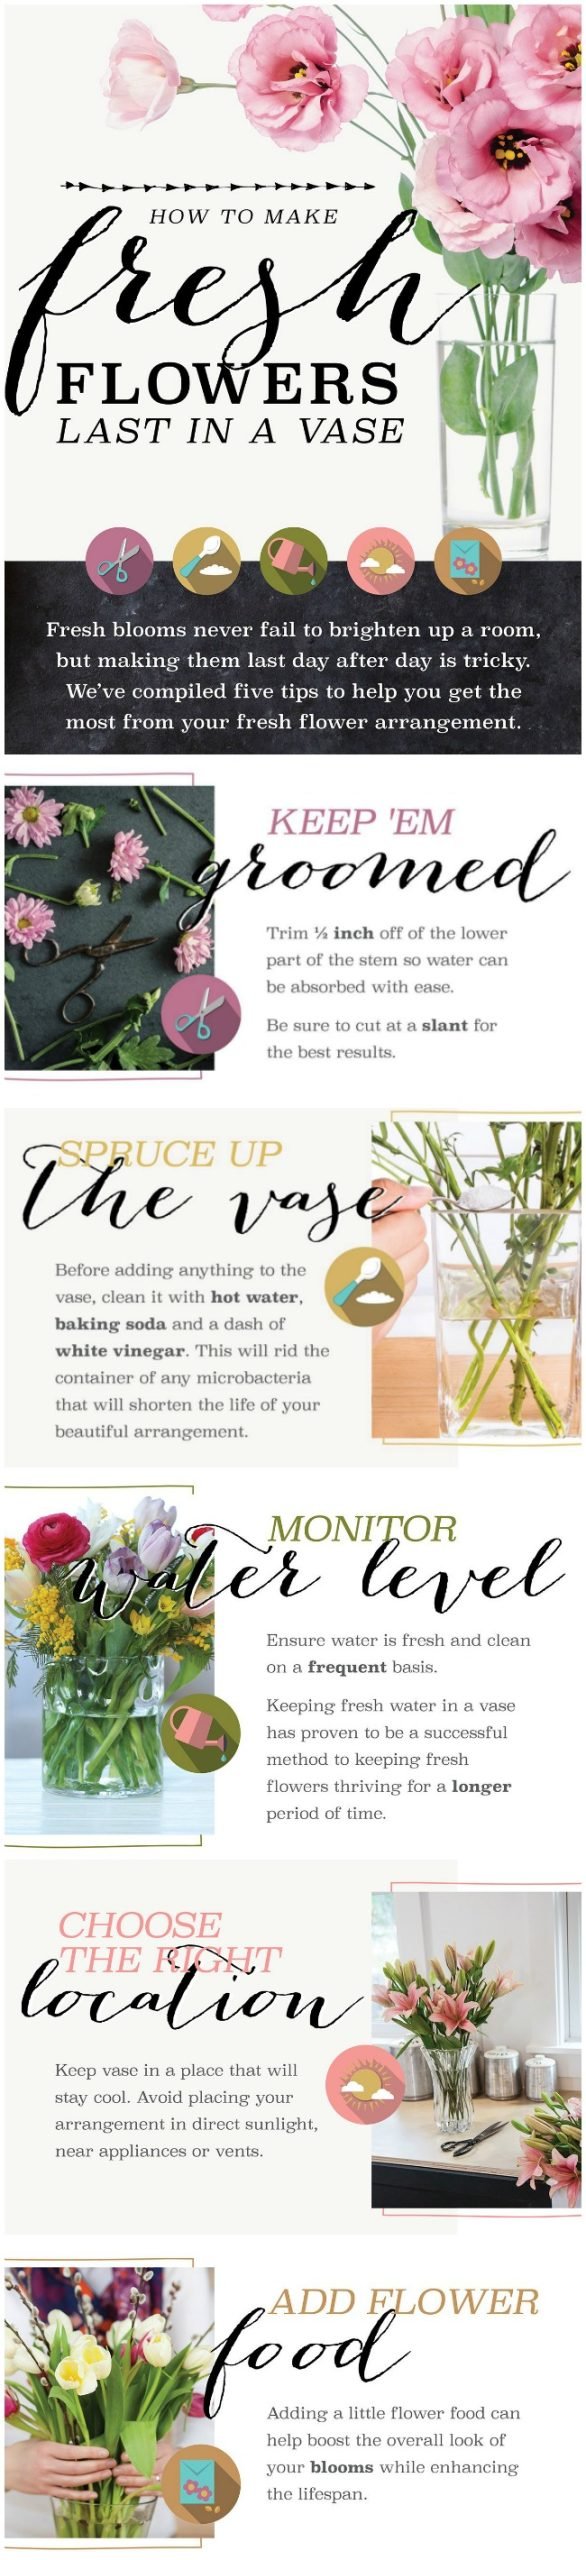 How to Make Cut Flowers Last Longer Infographic